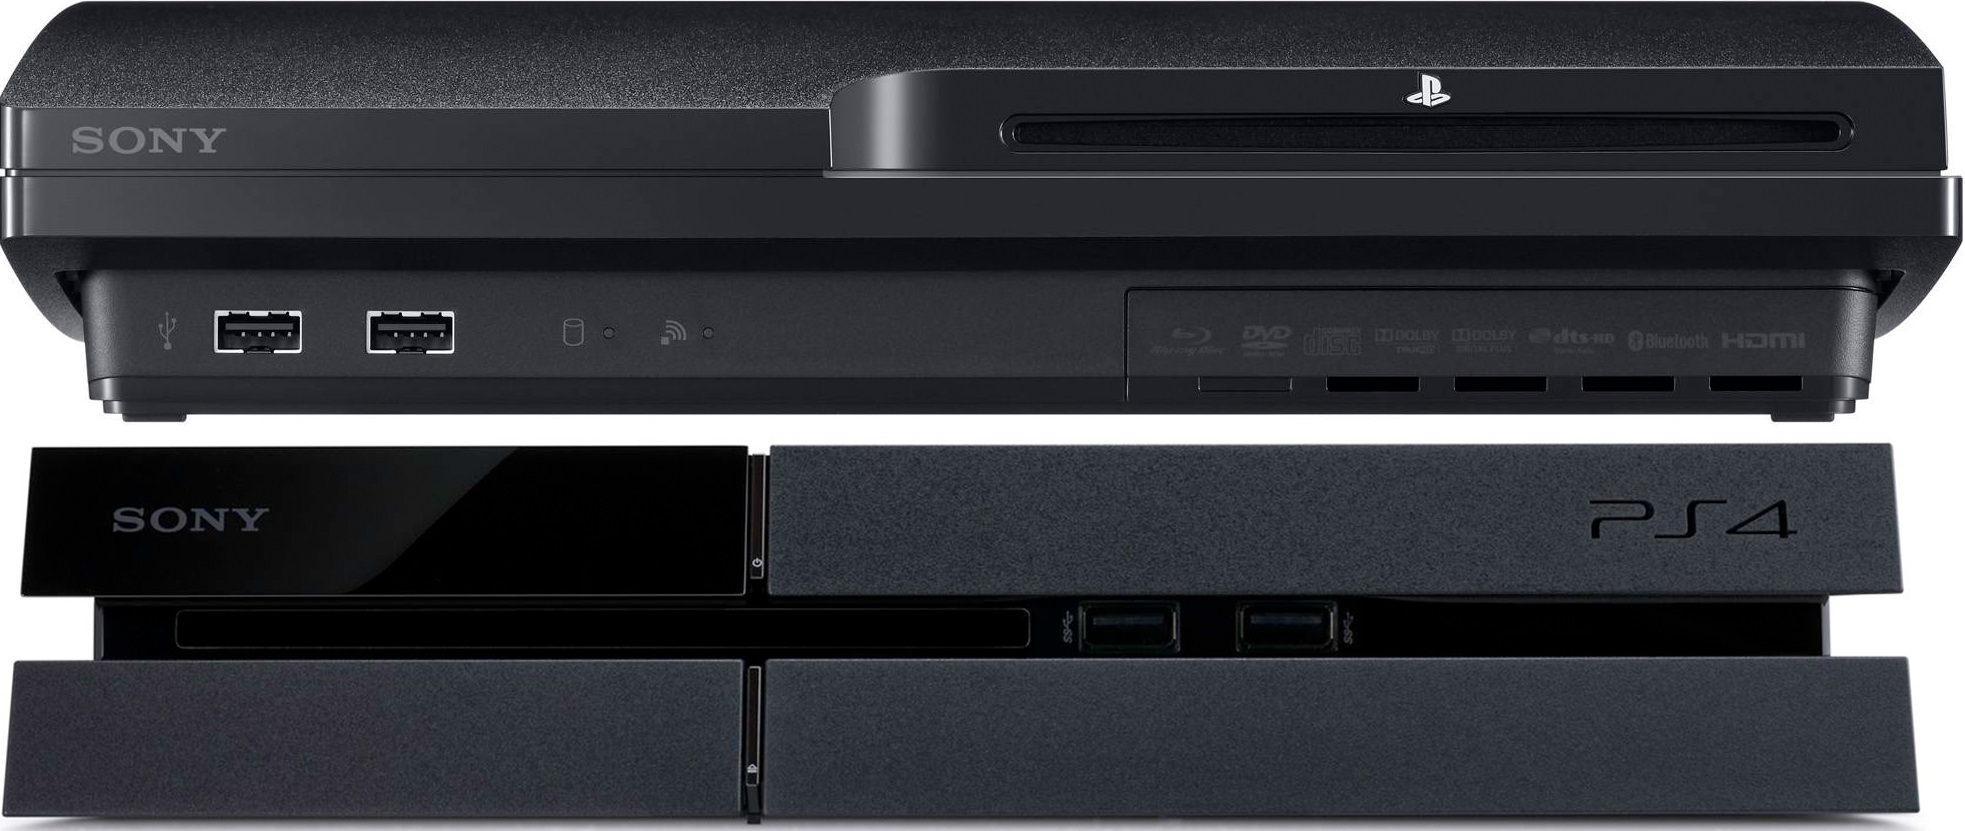 PlayStation 3 & PlayStation 4 Firmware Updates Announced